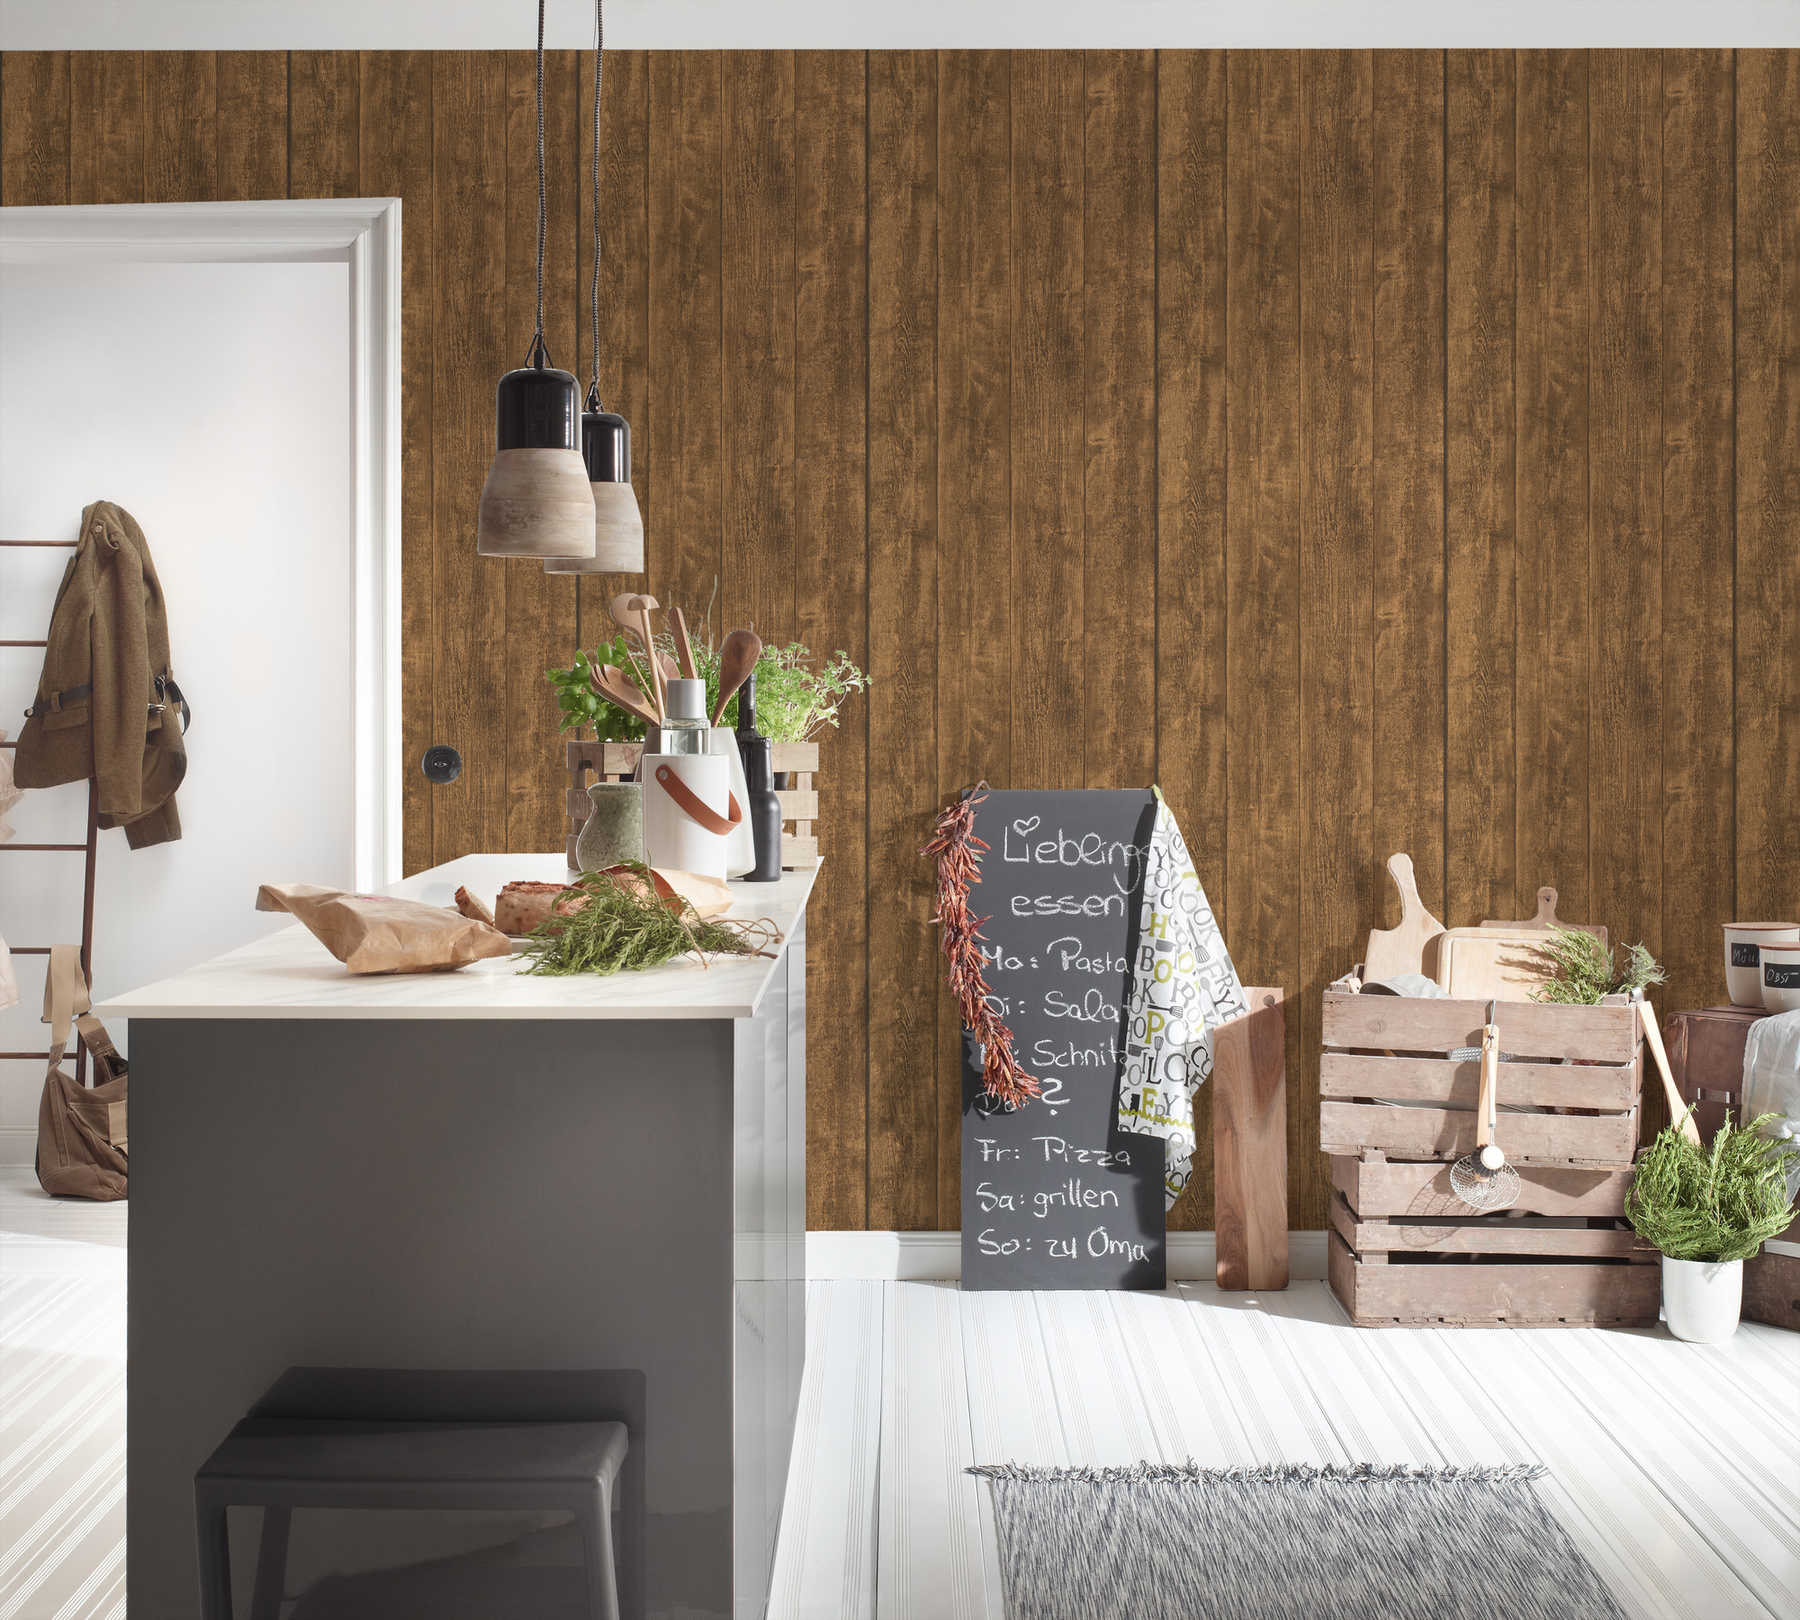             Wood look non-woven wallpaper with rustic grain - brown
        